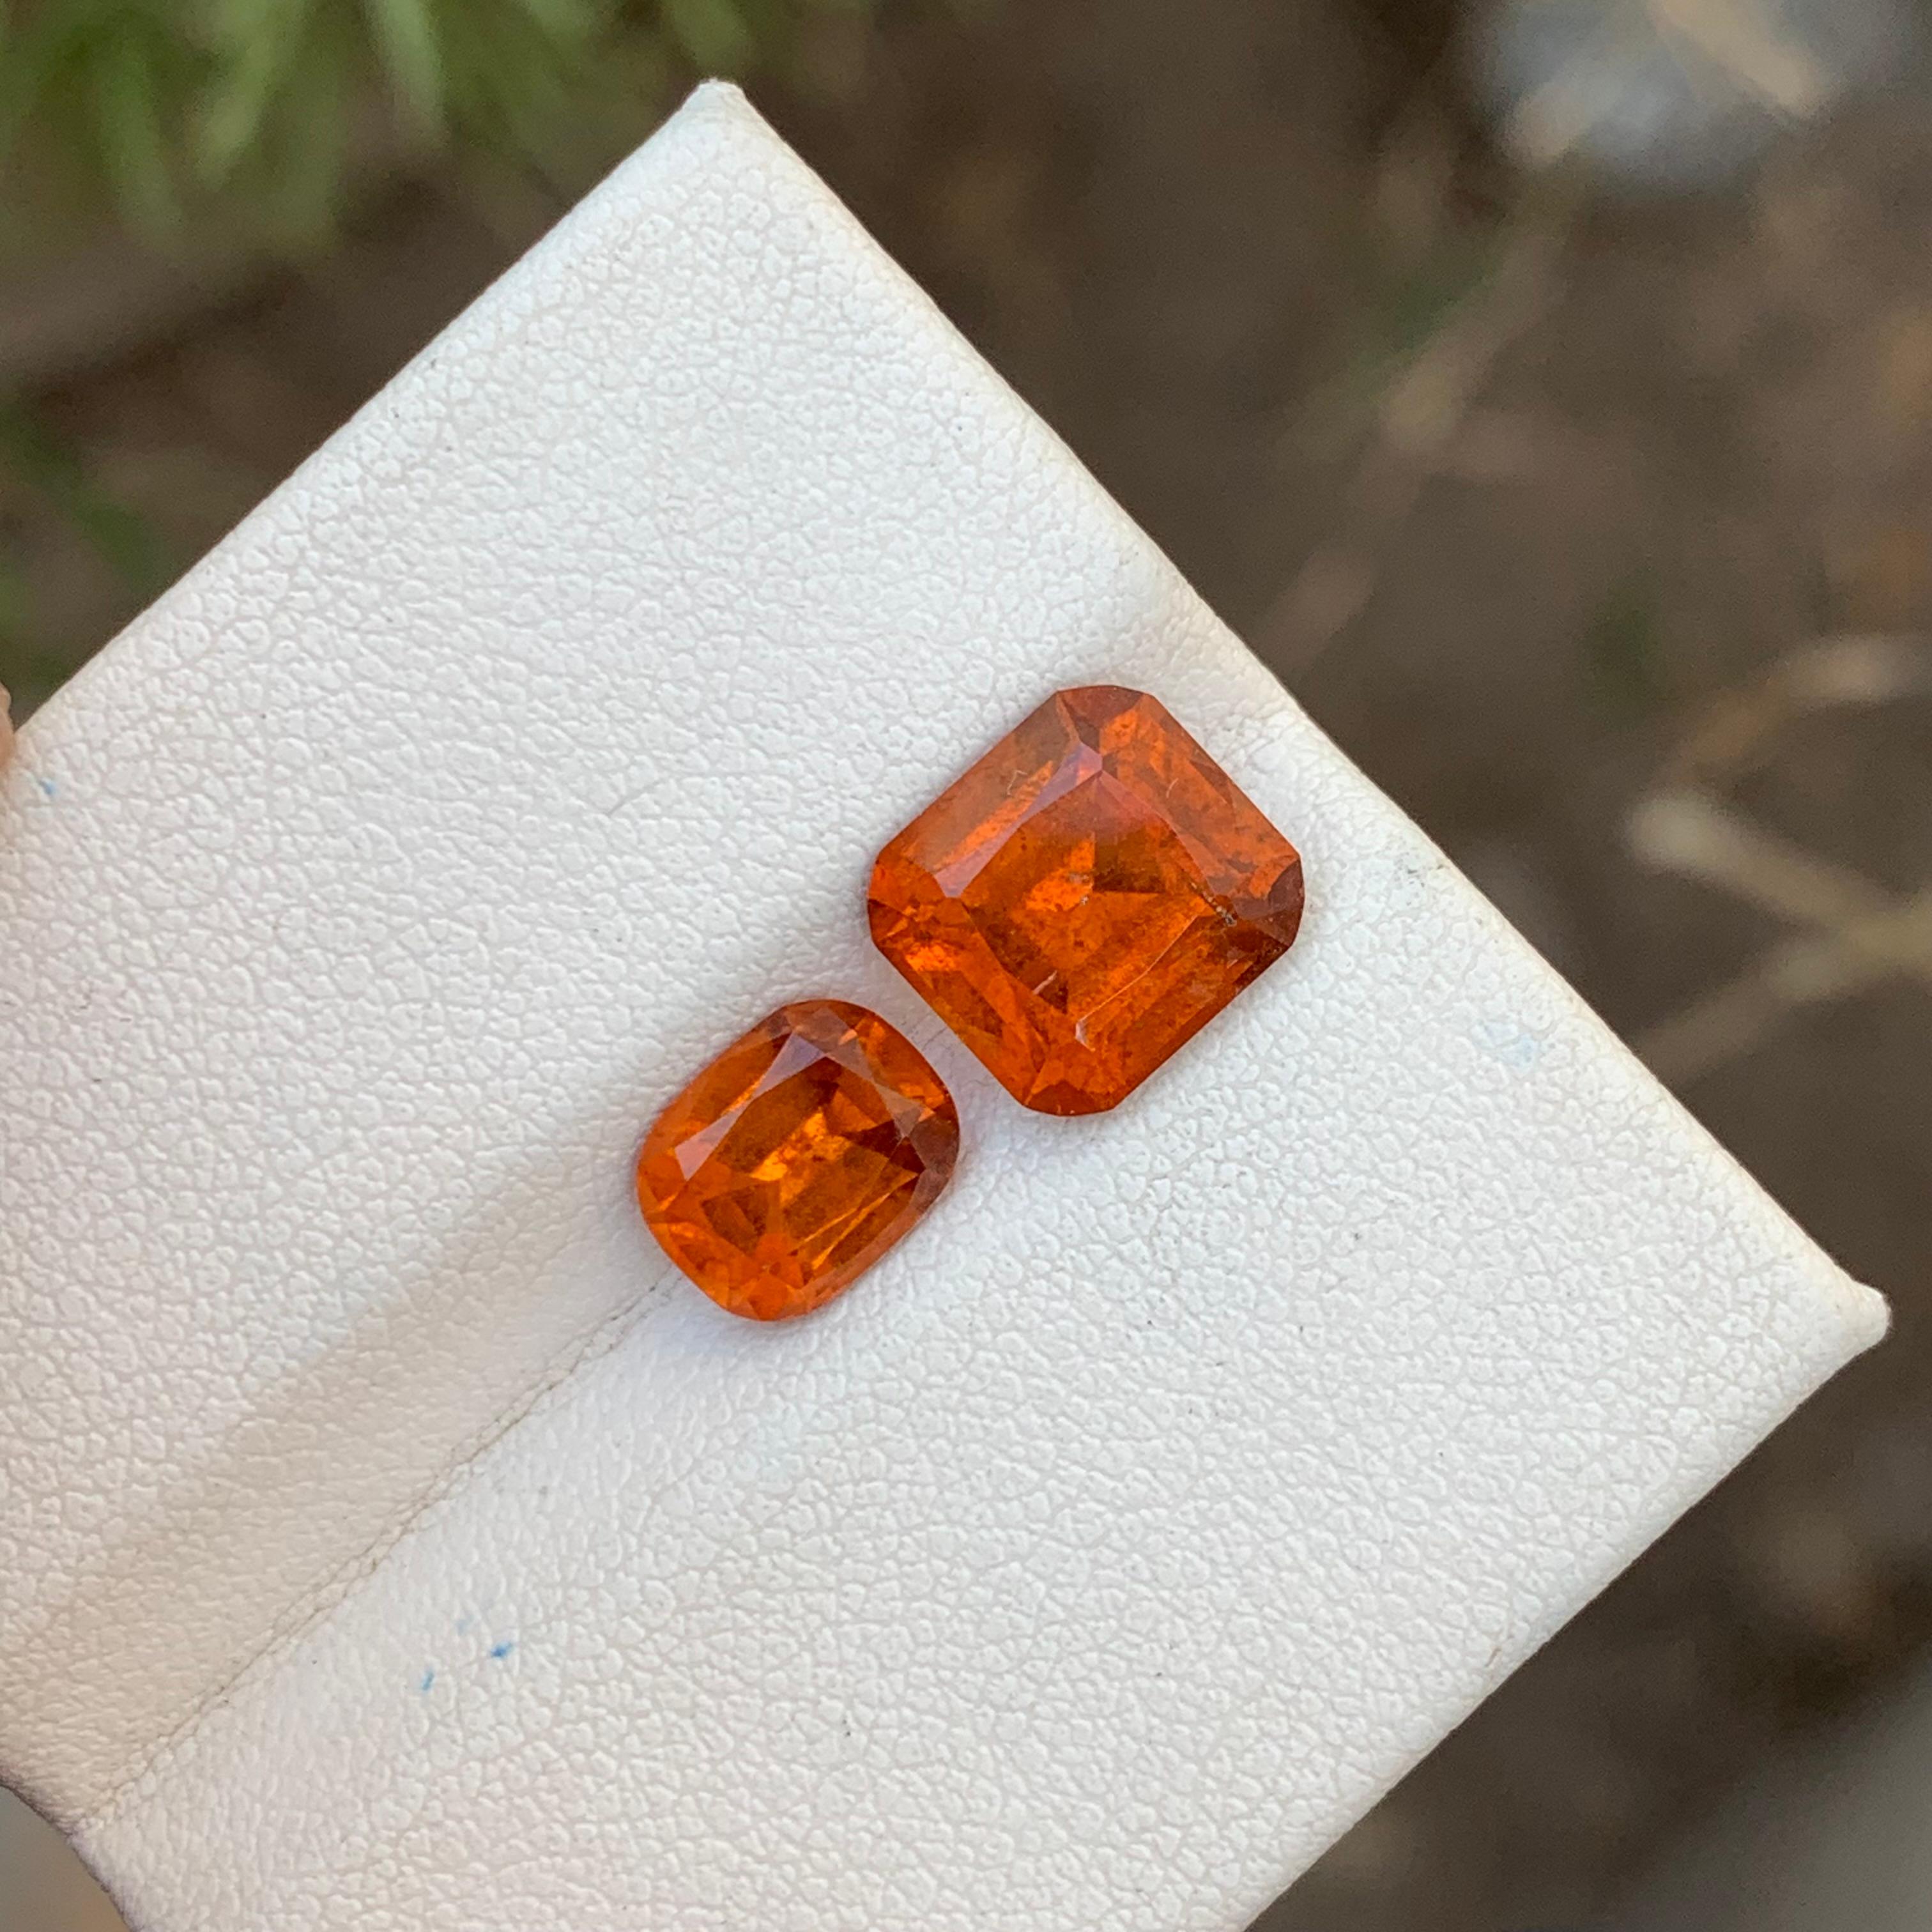 Antique Cushion Cut 5.95 Carats Natural Loose Hessonite Garnet 2 Pieces For Ring Jewelry Making  For Sale